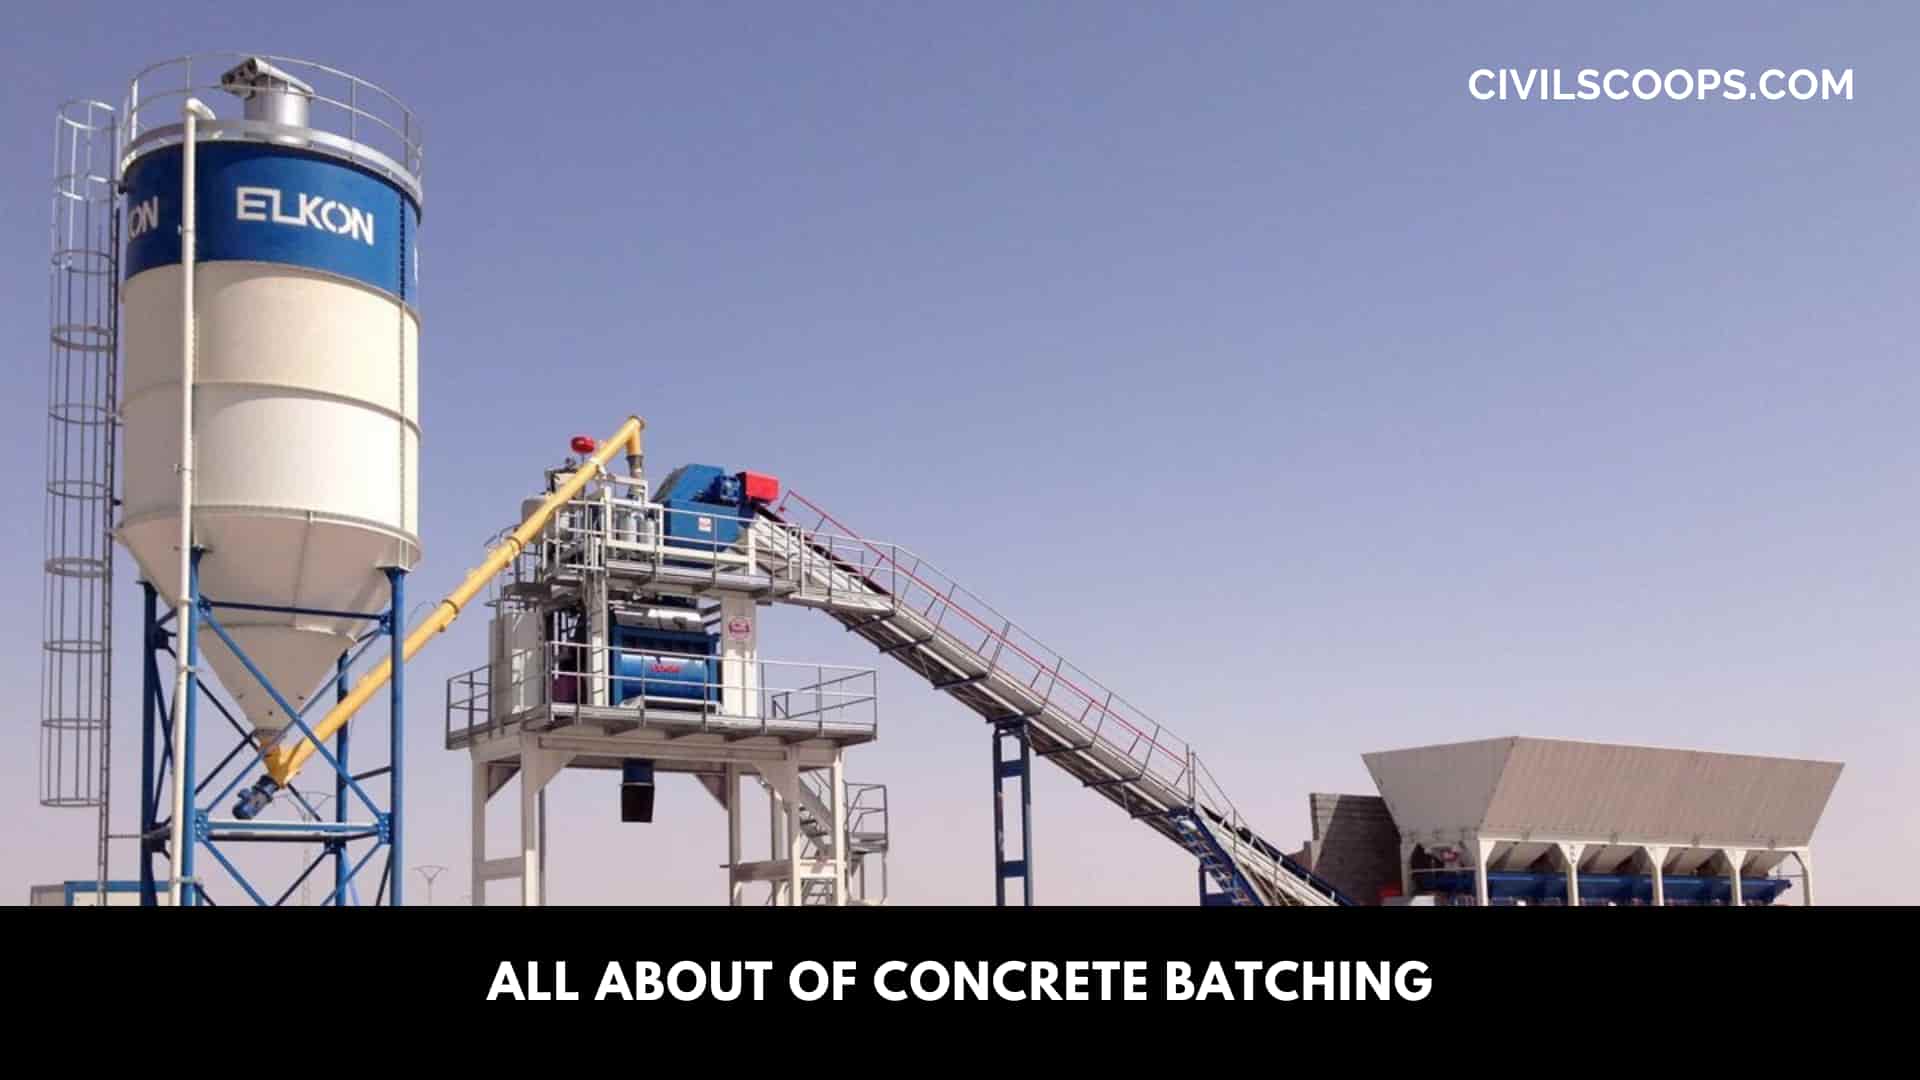 All About of Concrete Batching